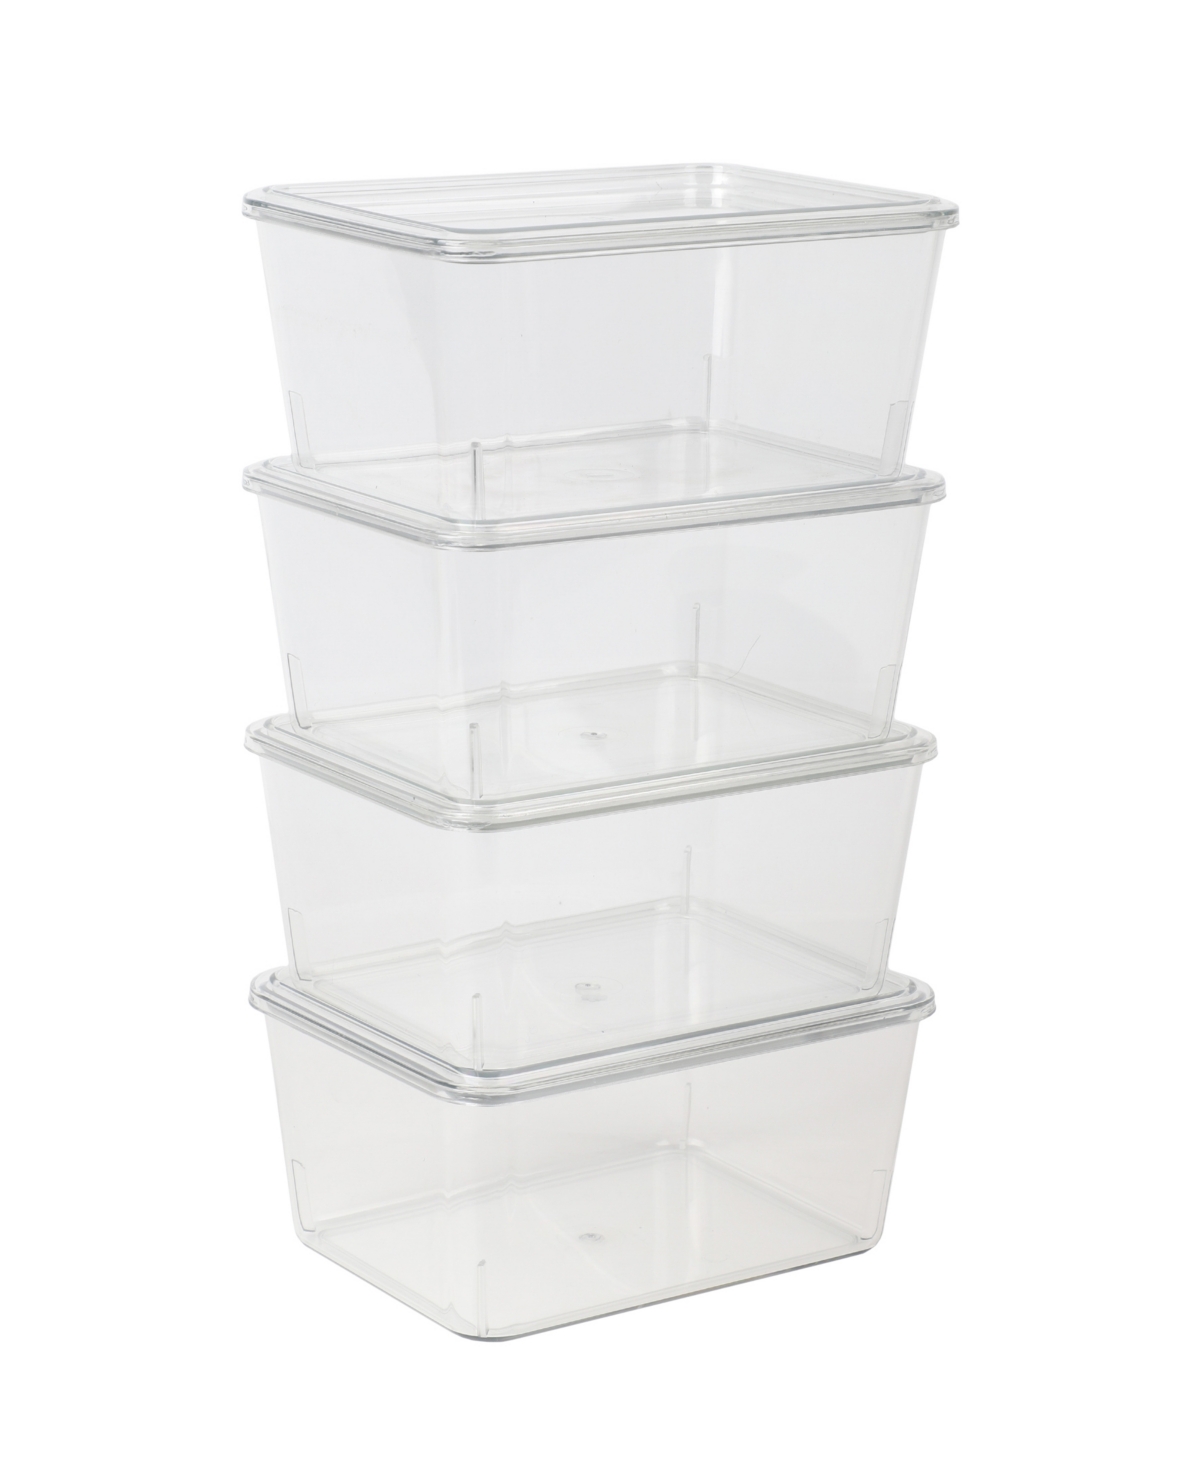 Brody 4 Pack Stackable Plastic Storage Box with Lids Office Desktop Organizers, 6.75" x 5" - Clear